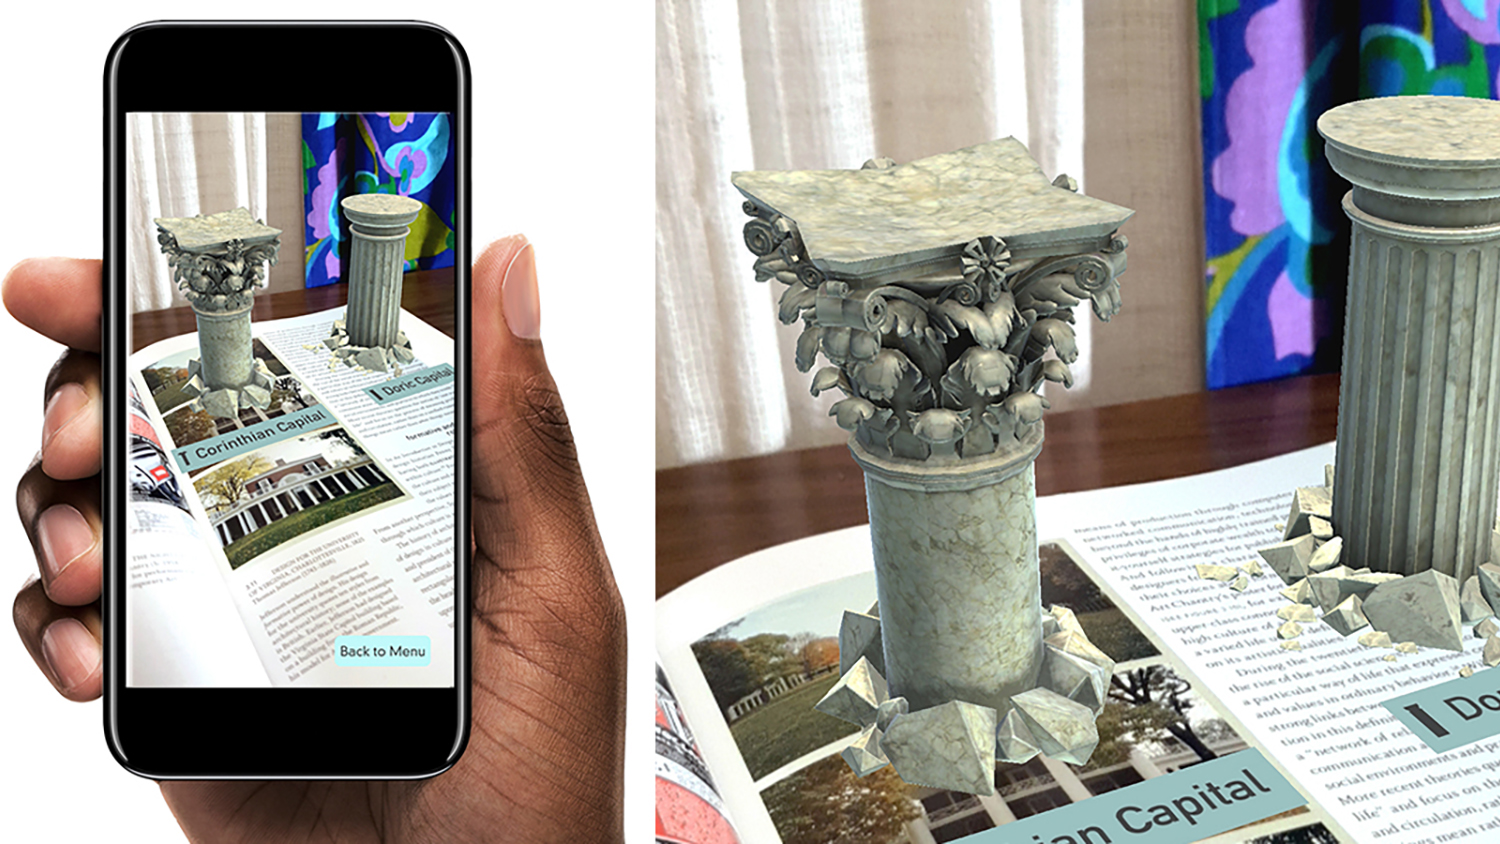 A view from the Graphic Design Theory augmented reality application. Photo by Rich Gurnsey.